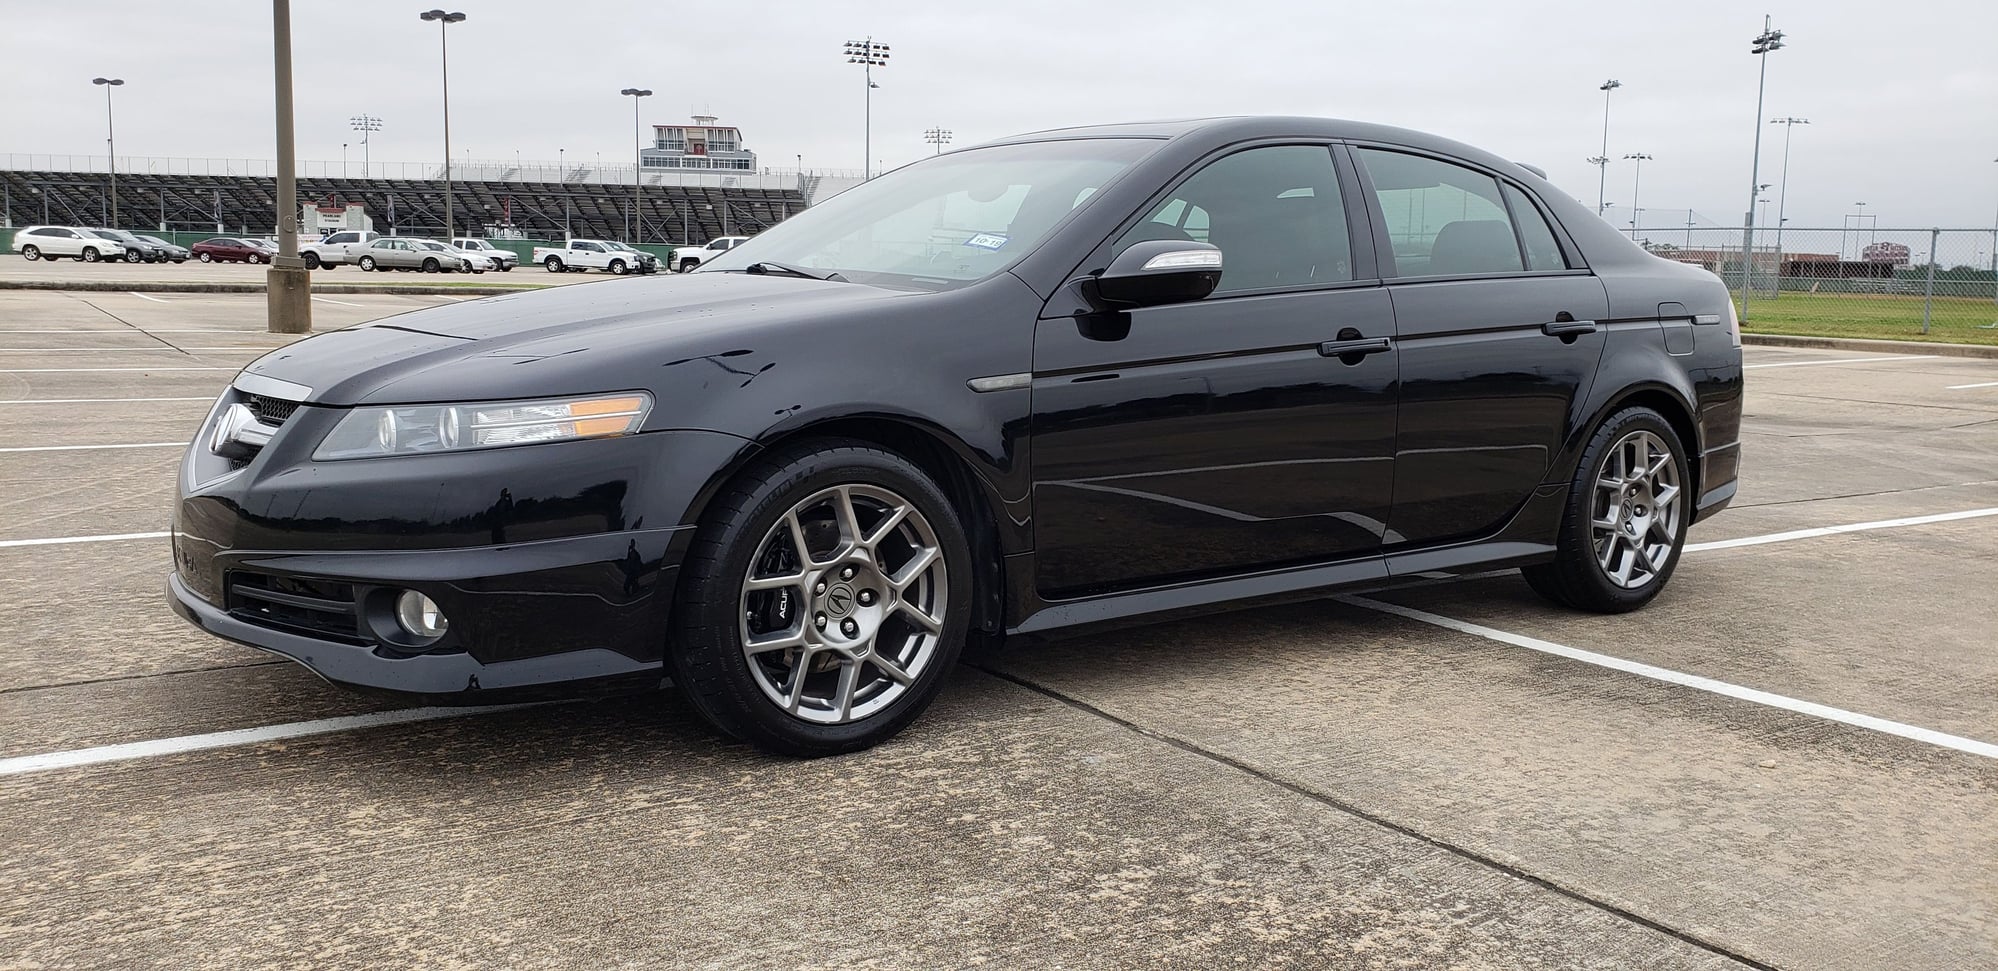 2008 Acura TL - SOLD: 2008 NBP Acura TL Type-S w/6sp Manual - Used - VIN 19UUA75578A044855 - 74,500 Miles - 6 cyl - 2WD - Manual - Sedan - Black - Pearland, TX 77581, United States